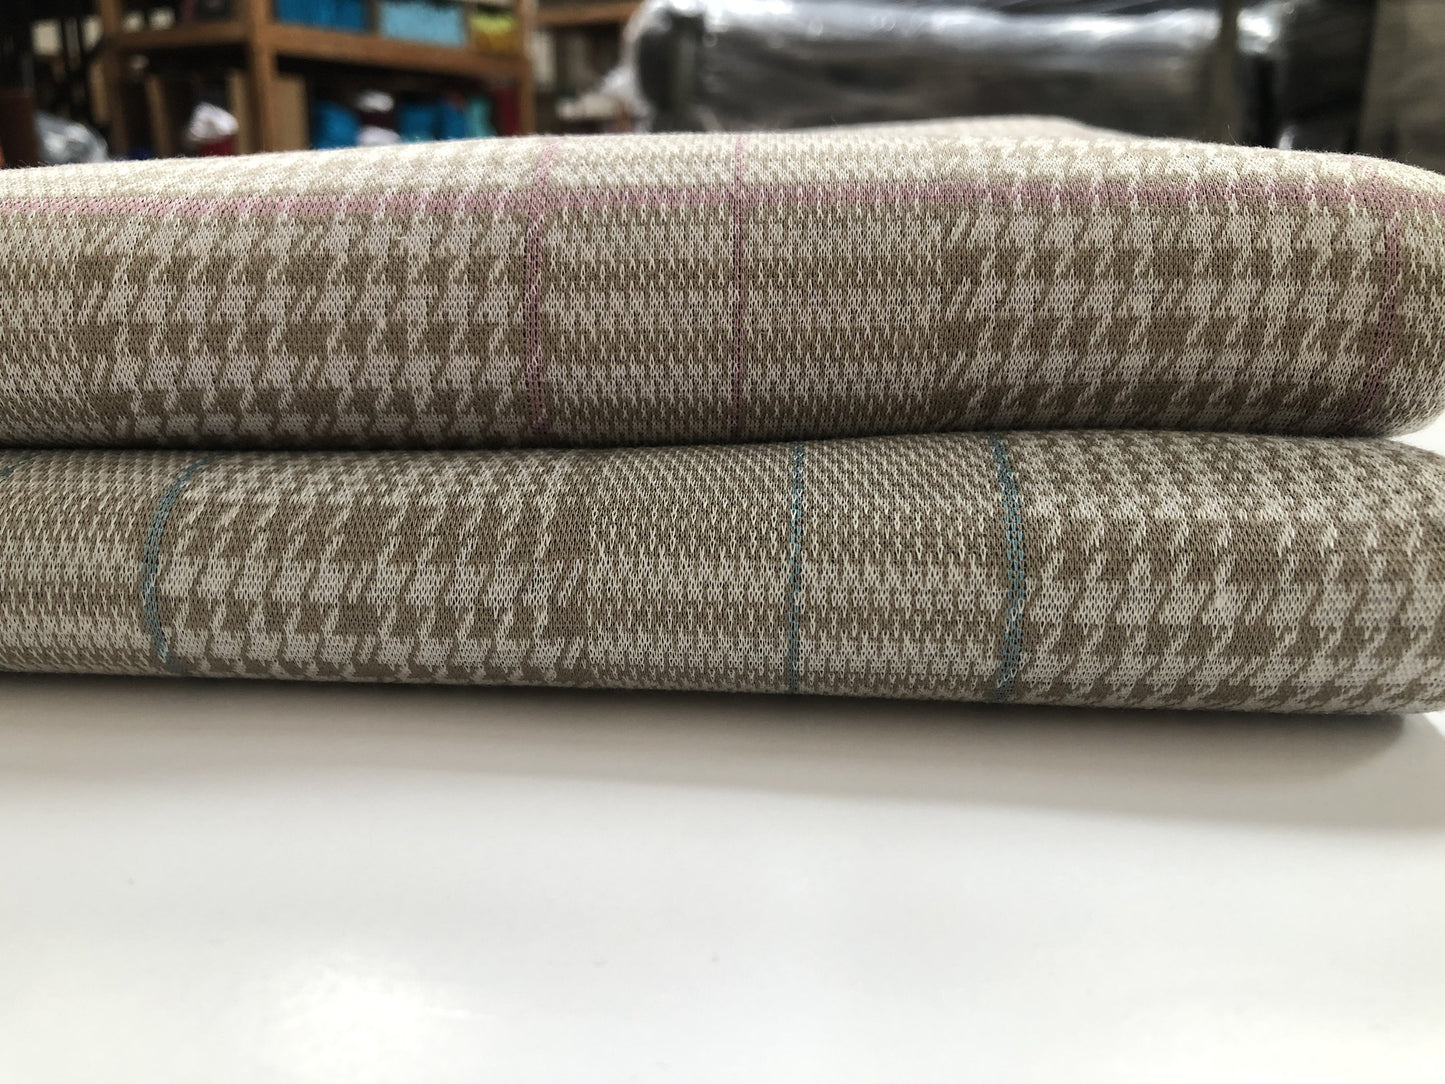 Beige/Pink Or Beige/Blue Houndstooth Plaid Stretchy Fabric